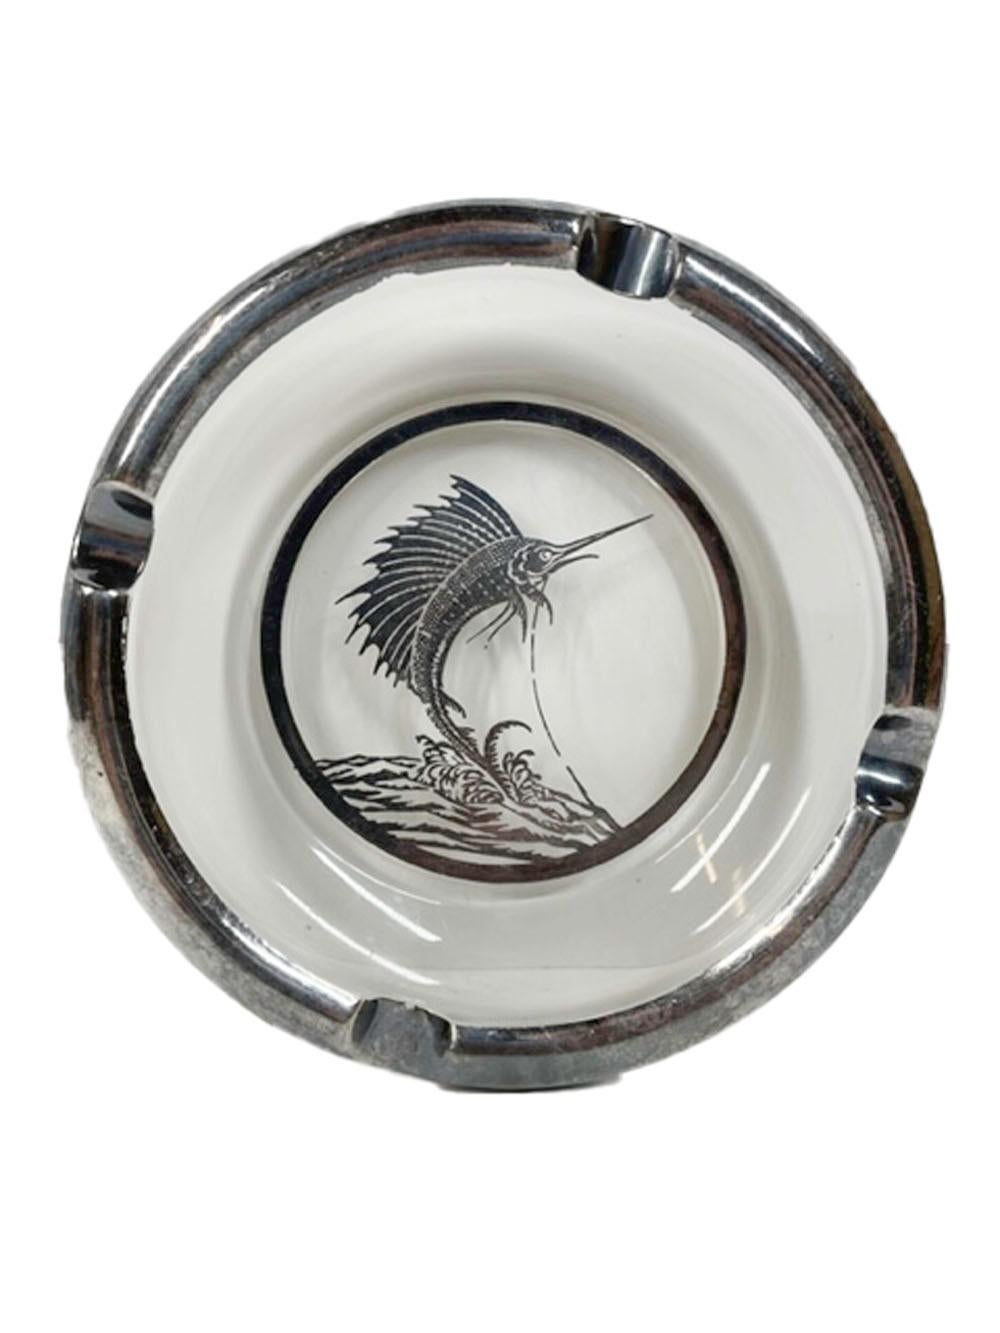 Art Deco, Rockwell Silver Overlay Clear Glass Ashtray with Marlin/Sailfish Motif In Good Condition For Sale In Nantucket, MA